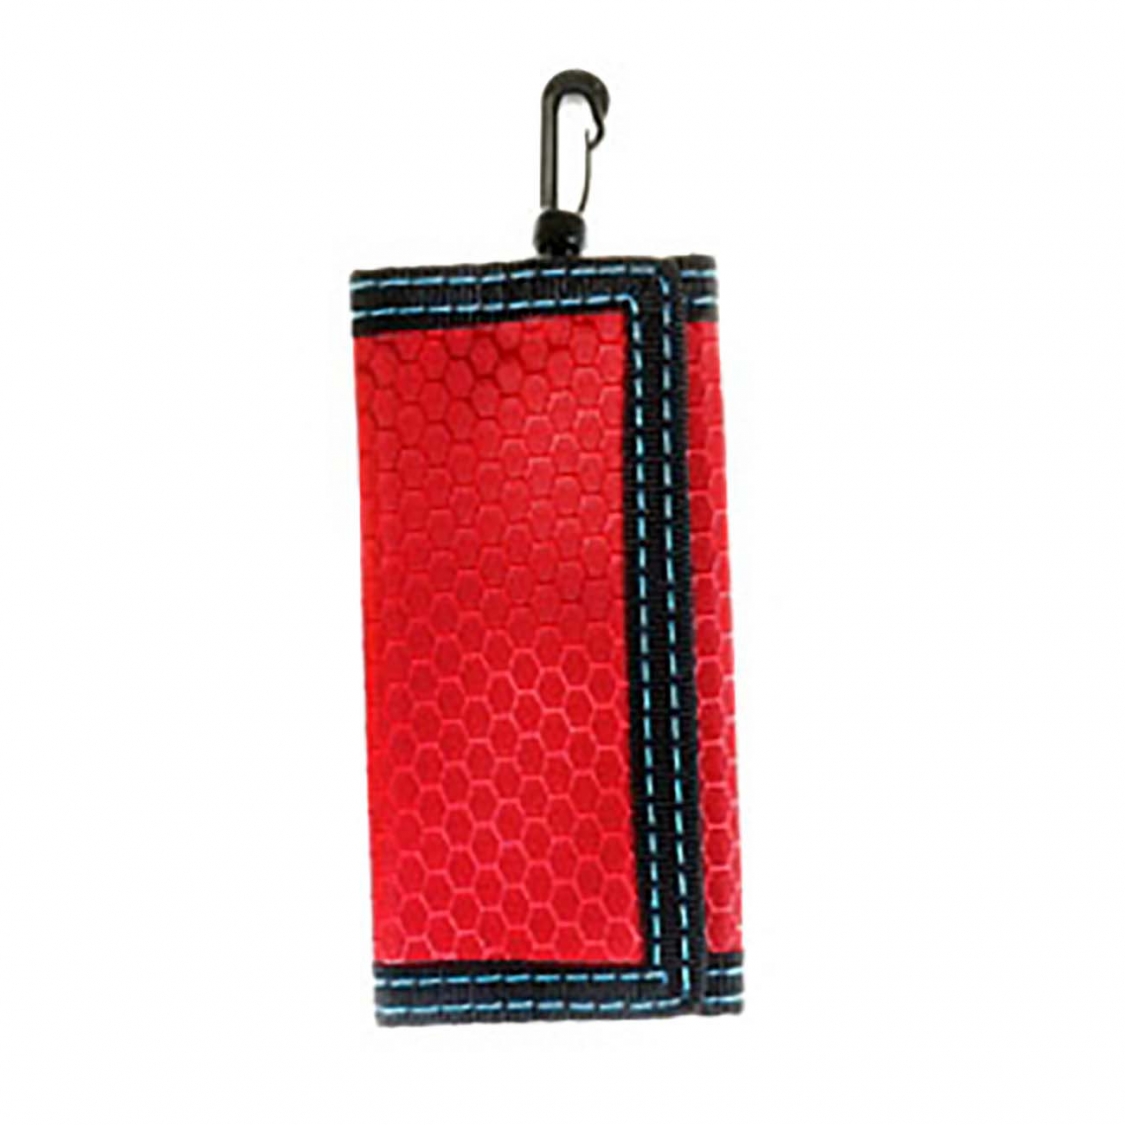 Promaster Soft Memory Card Case (red)